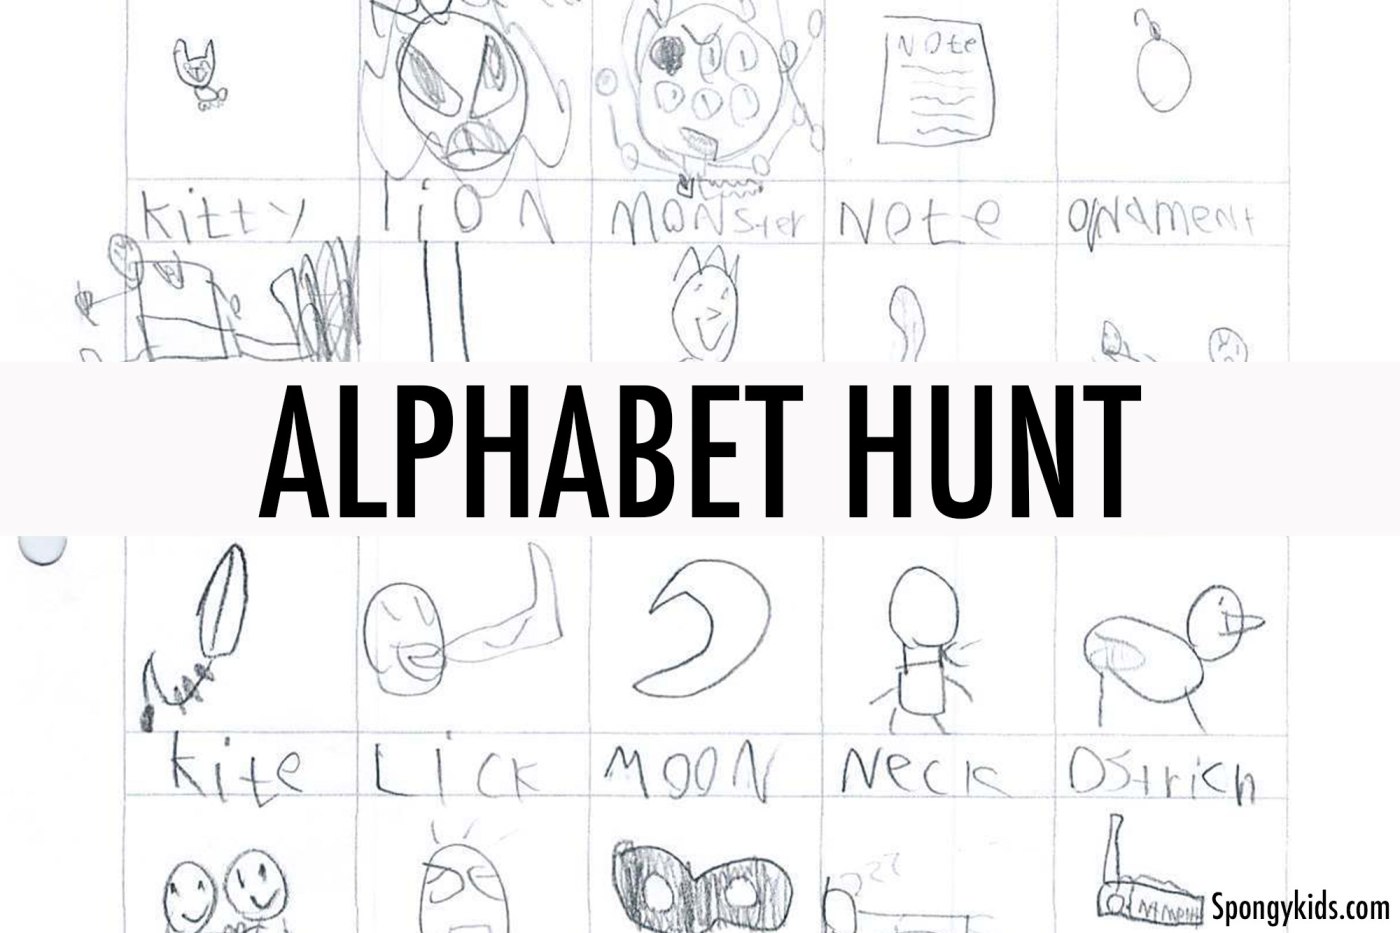 Alphabet Hunt - Learning Activities - Free Printable - Free Downloadable PDF